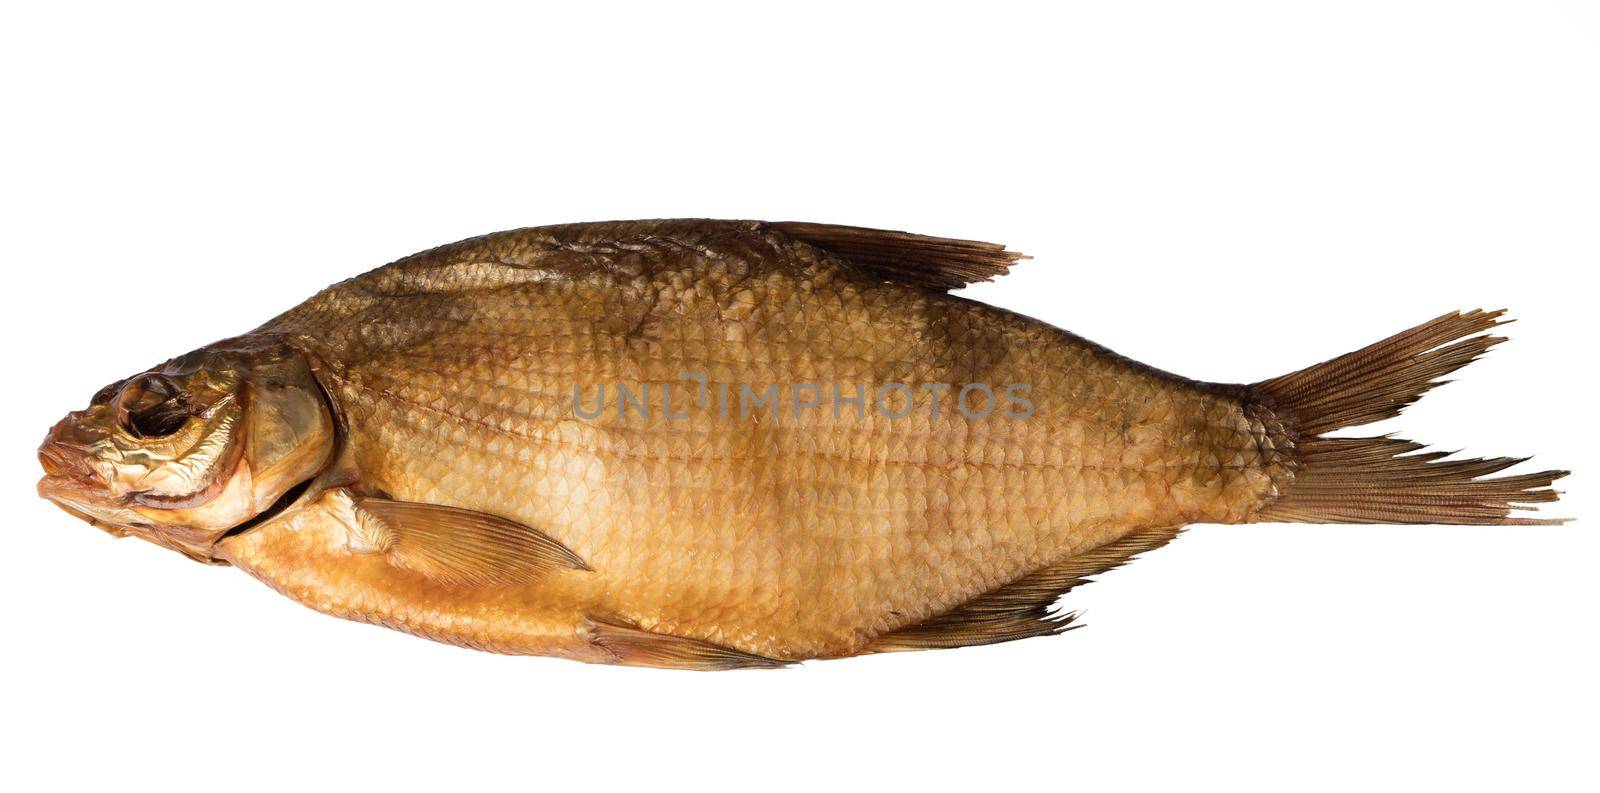 Cold smoked fish bream on a white background